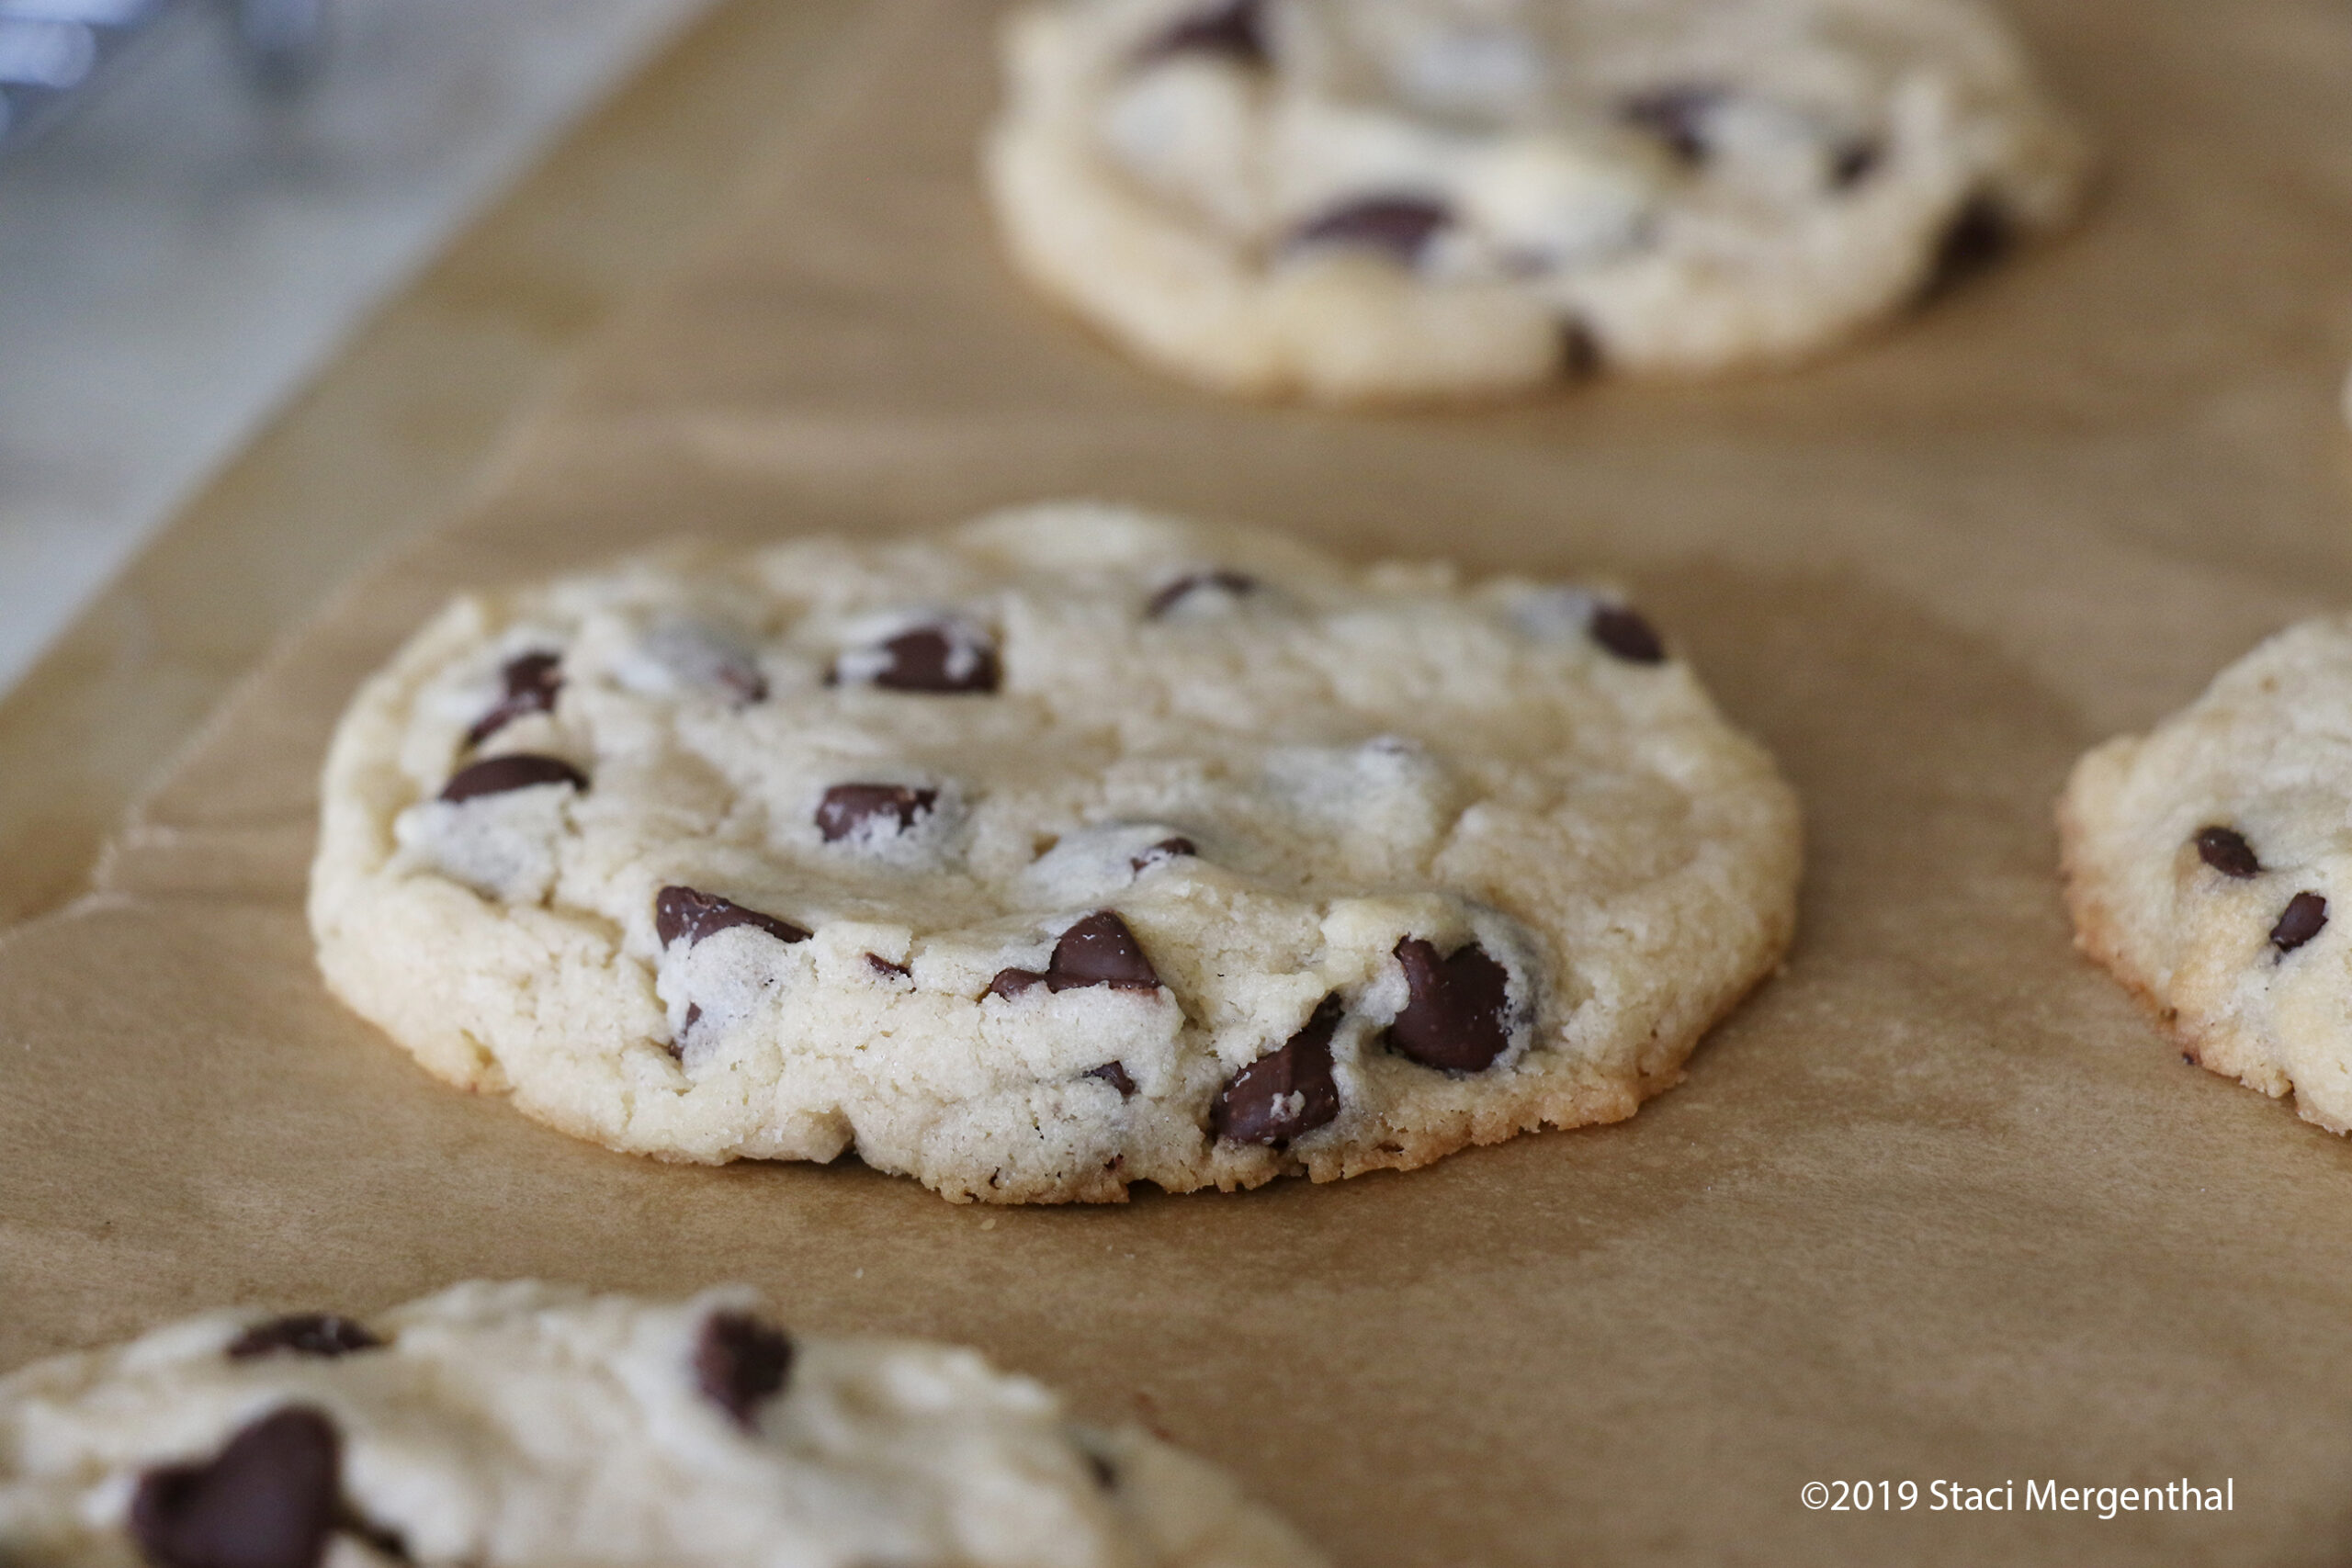 Baking for No Particular Reason: Cream Cheese Cookies with BAILEYS Irish Cream Chocolate Chips